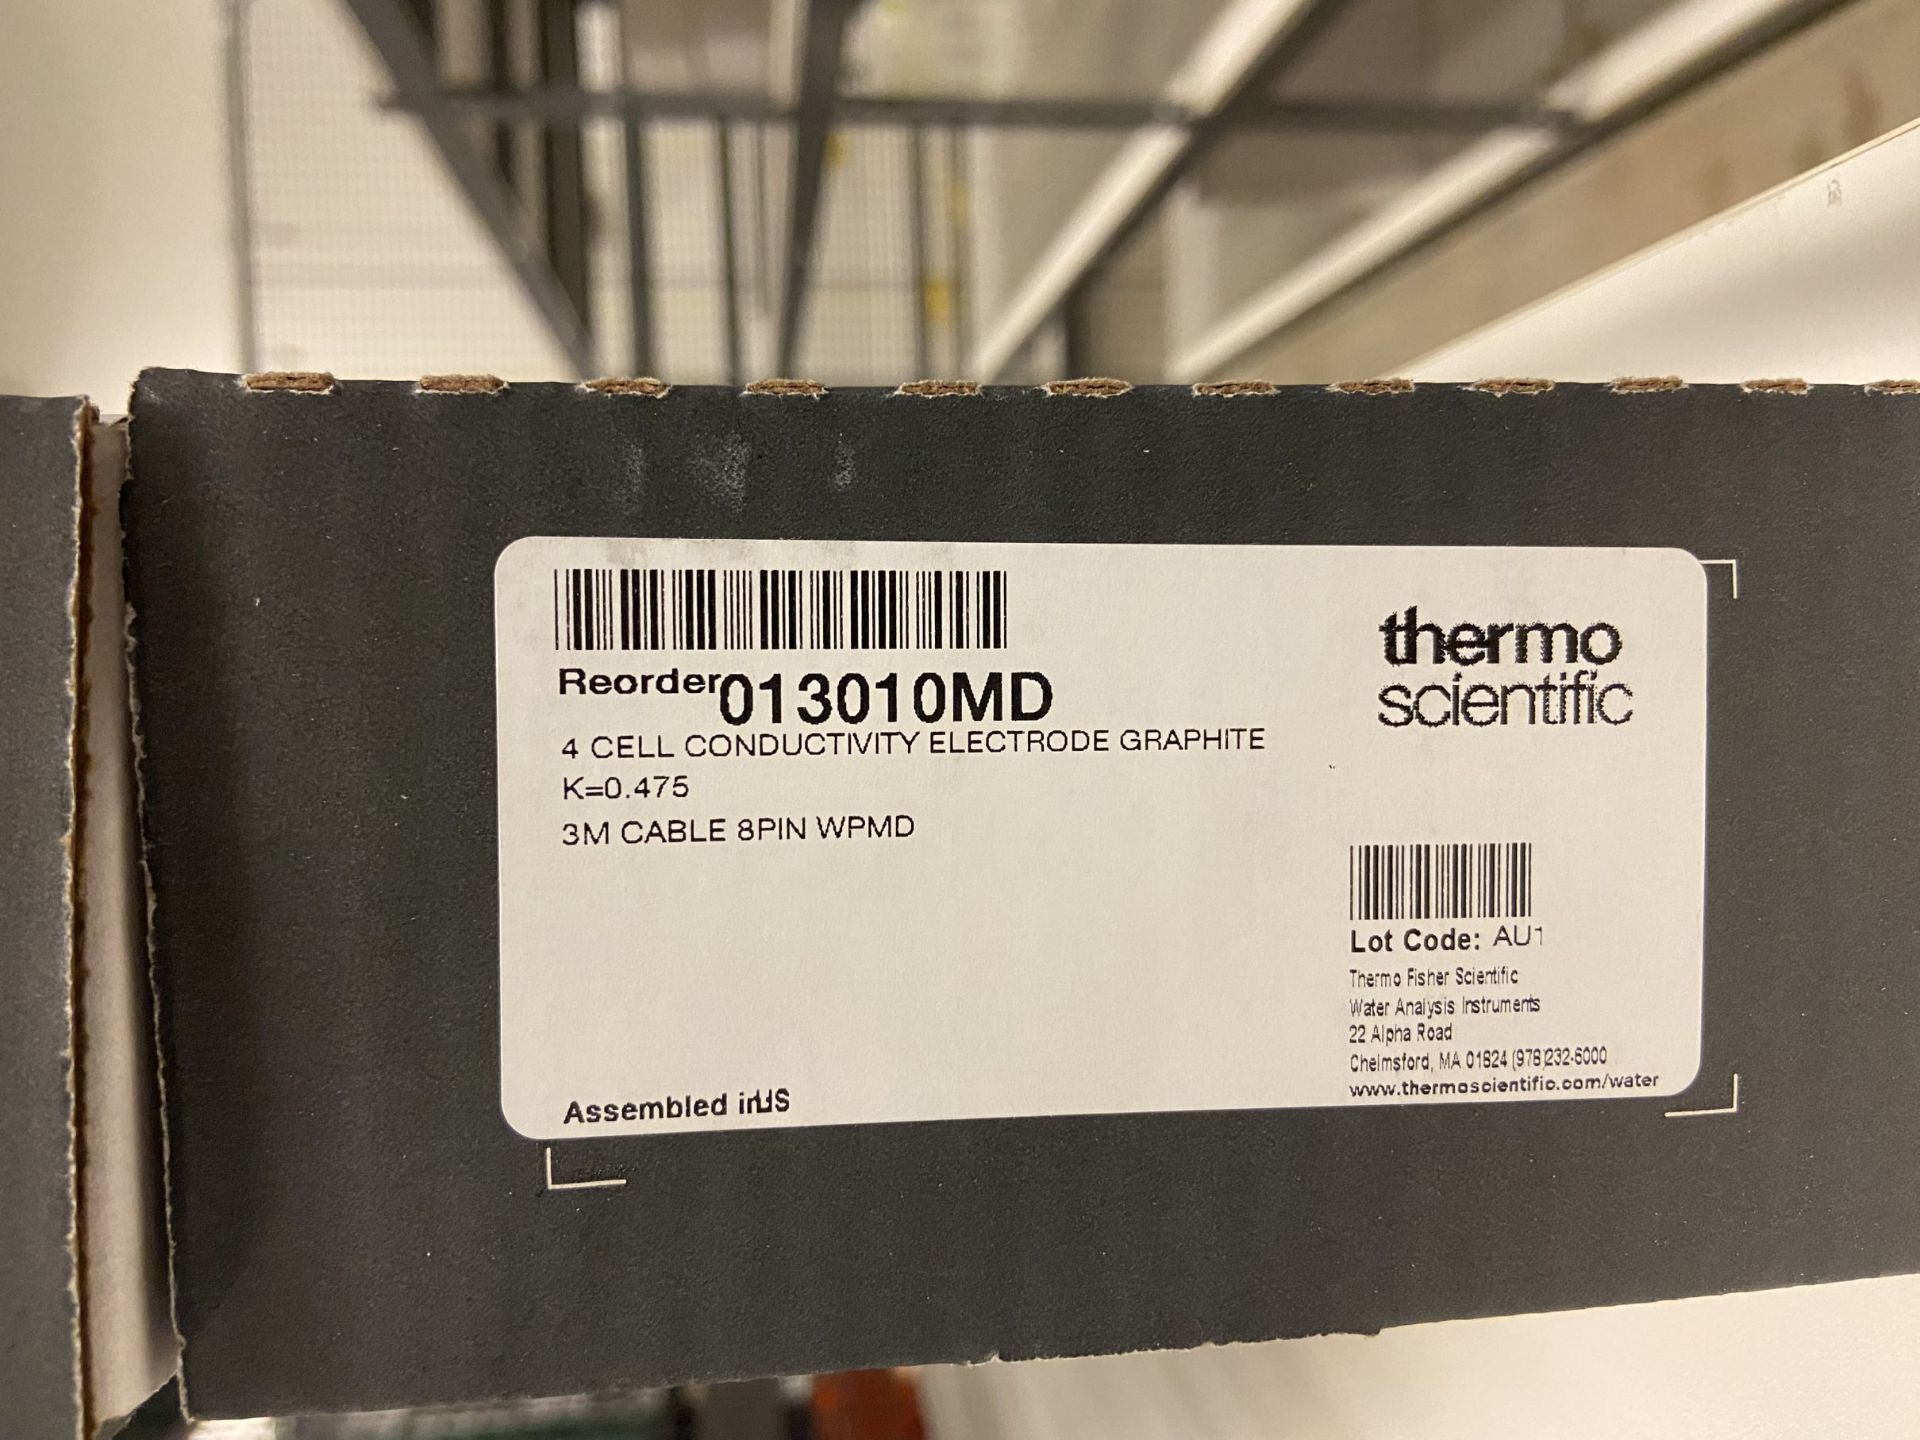 Thermo Scientific Electrode - Image 2 of 2